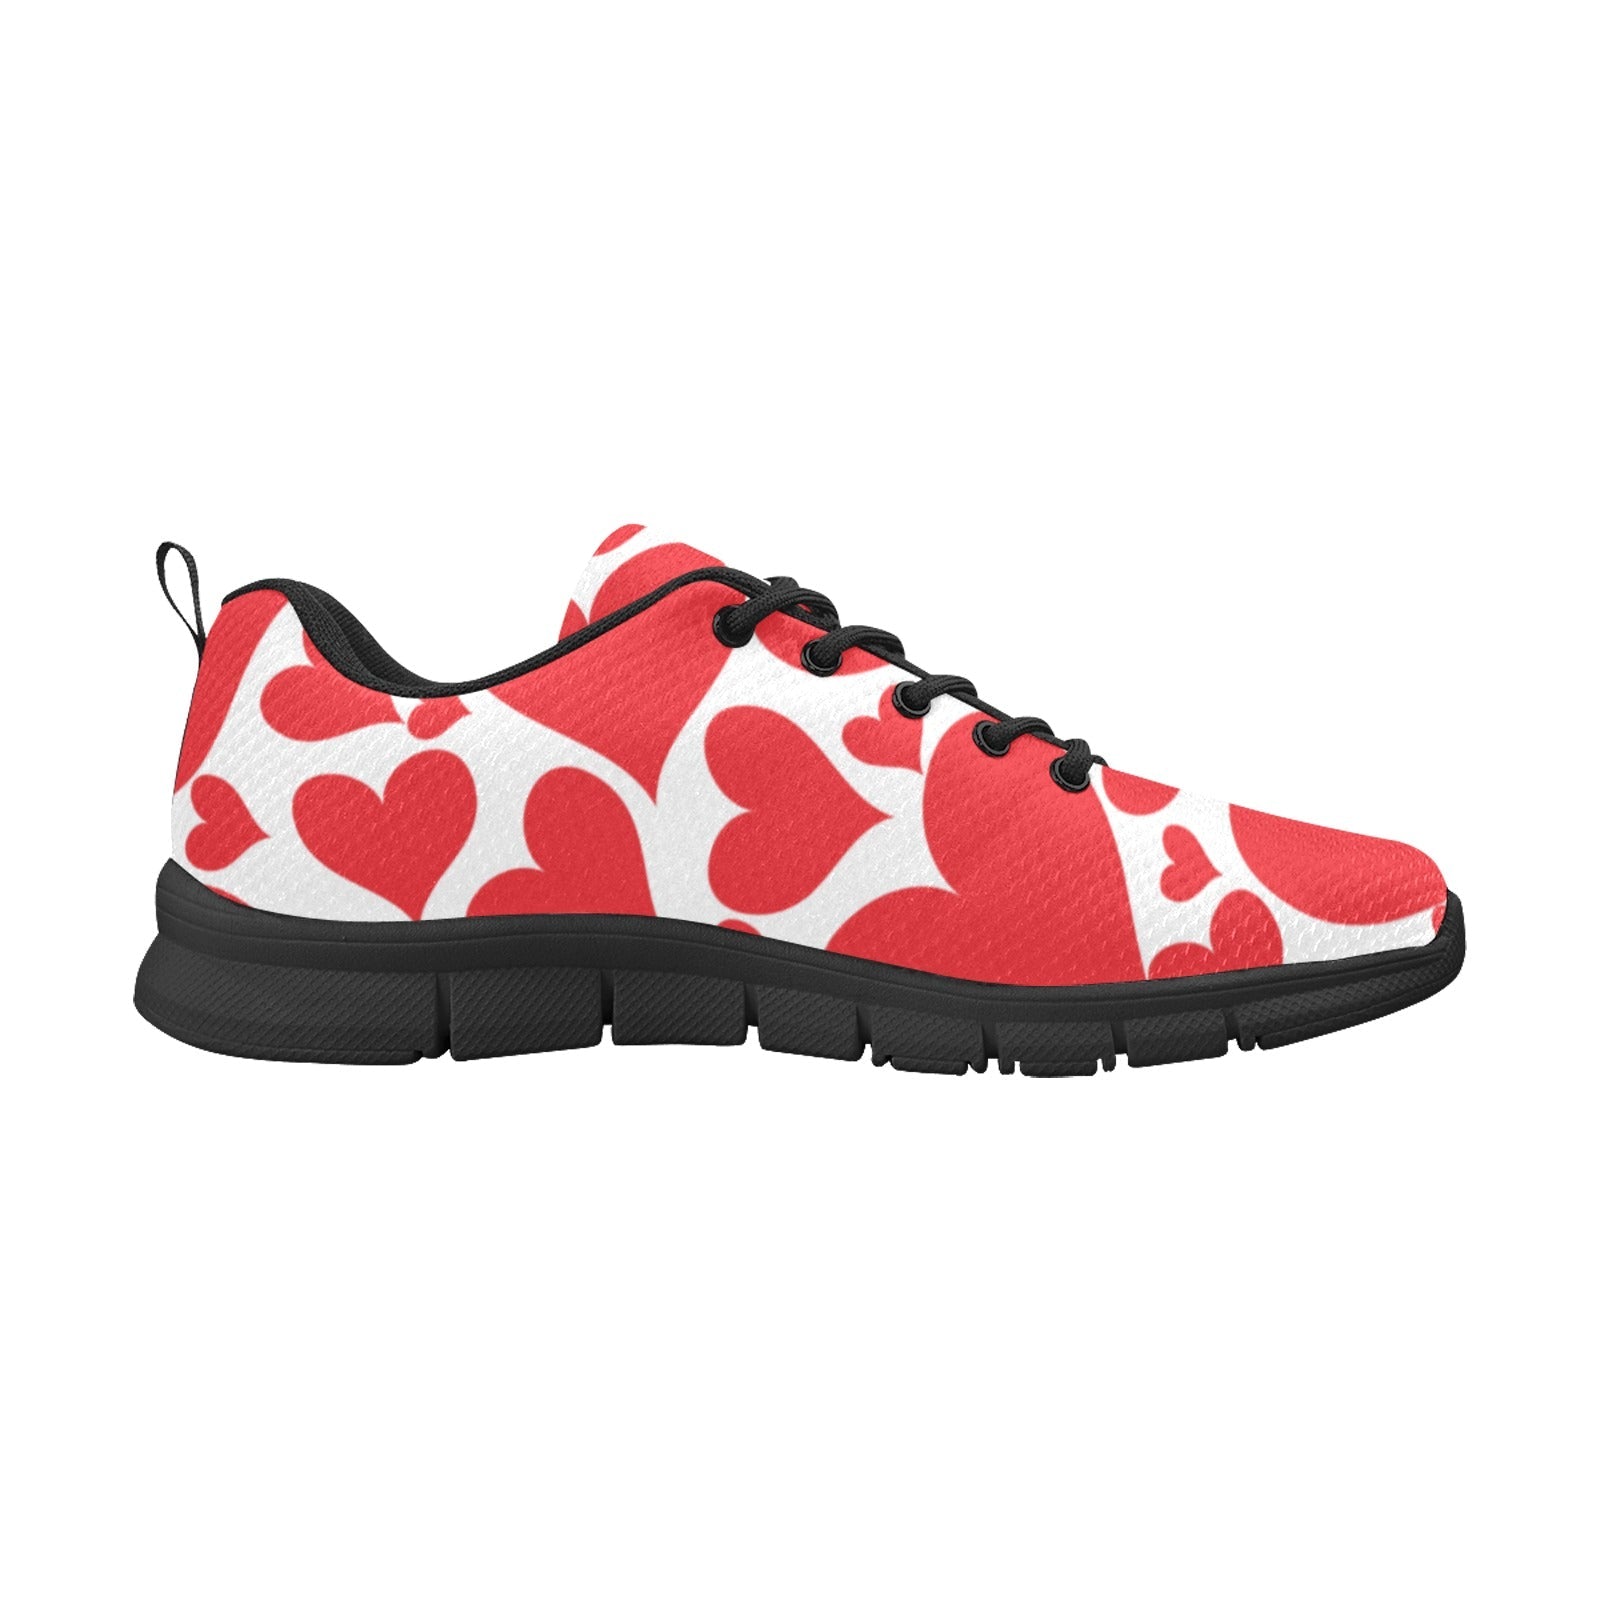 Uniquely You Sneakers for Men, Love Red Hearts Running Shoes - KRE Prime Deals